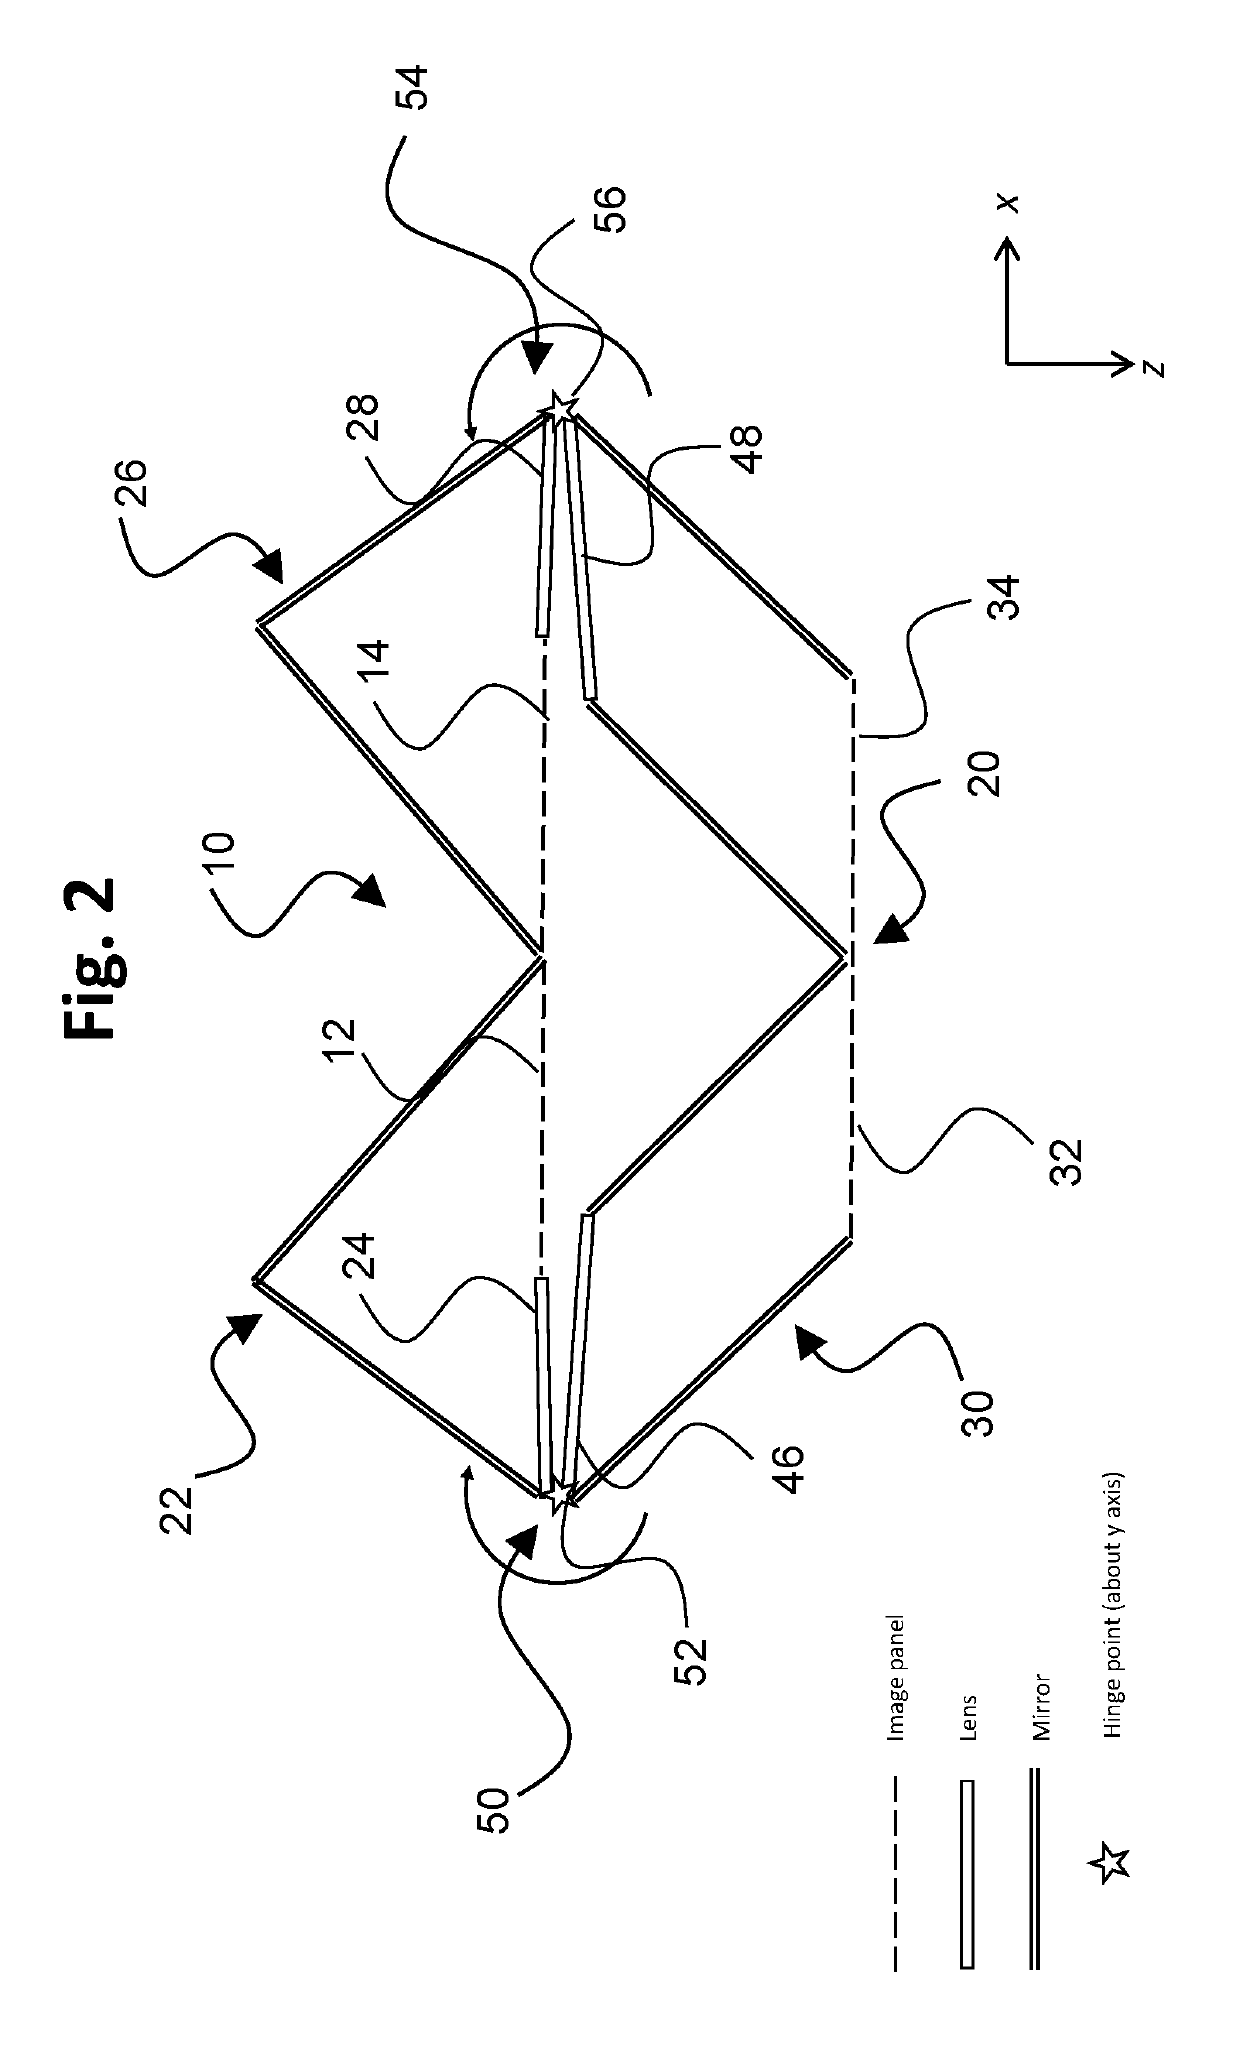 Hinged lens configuration for a compact portable head-mounted display system